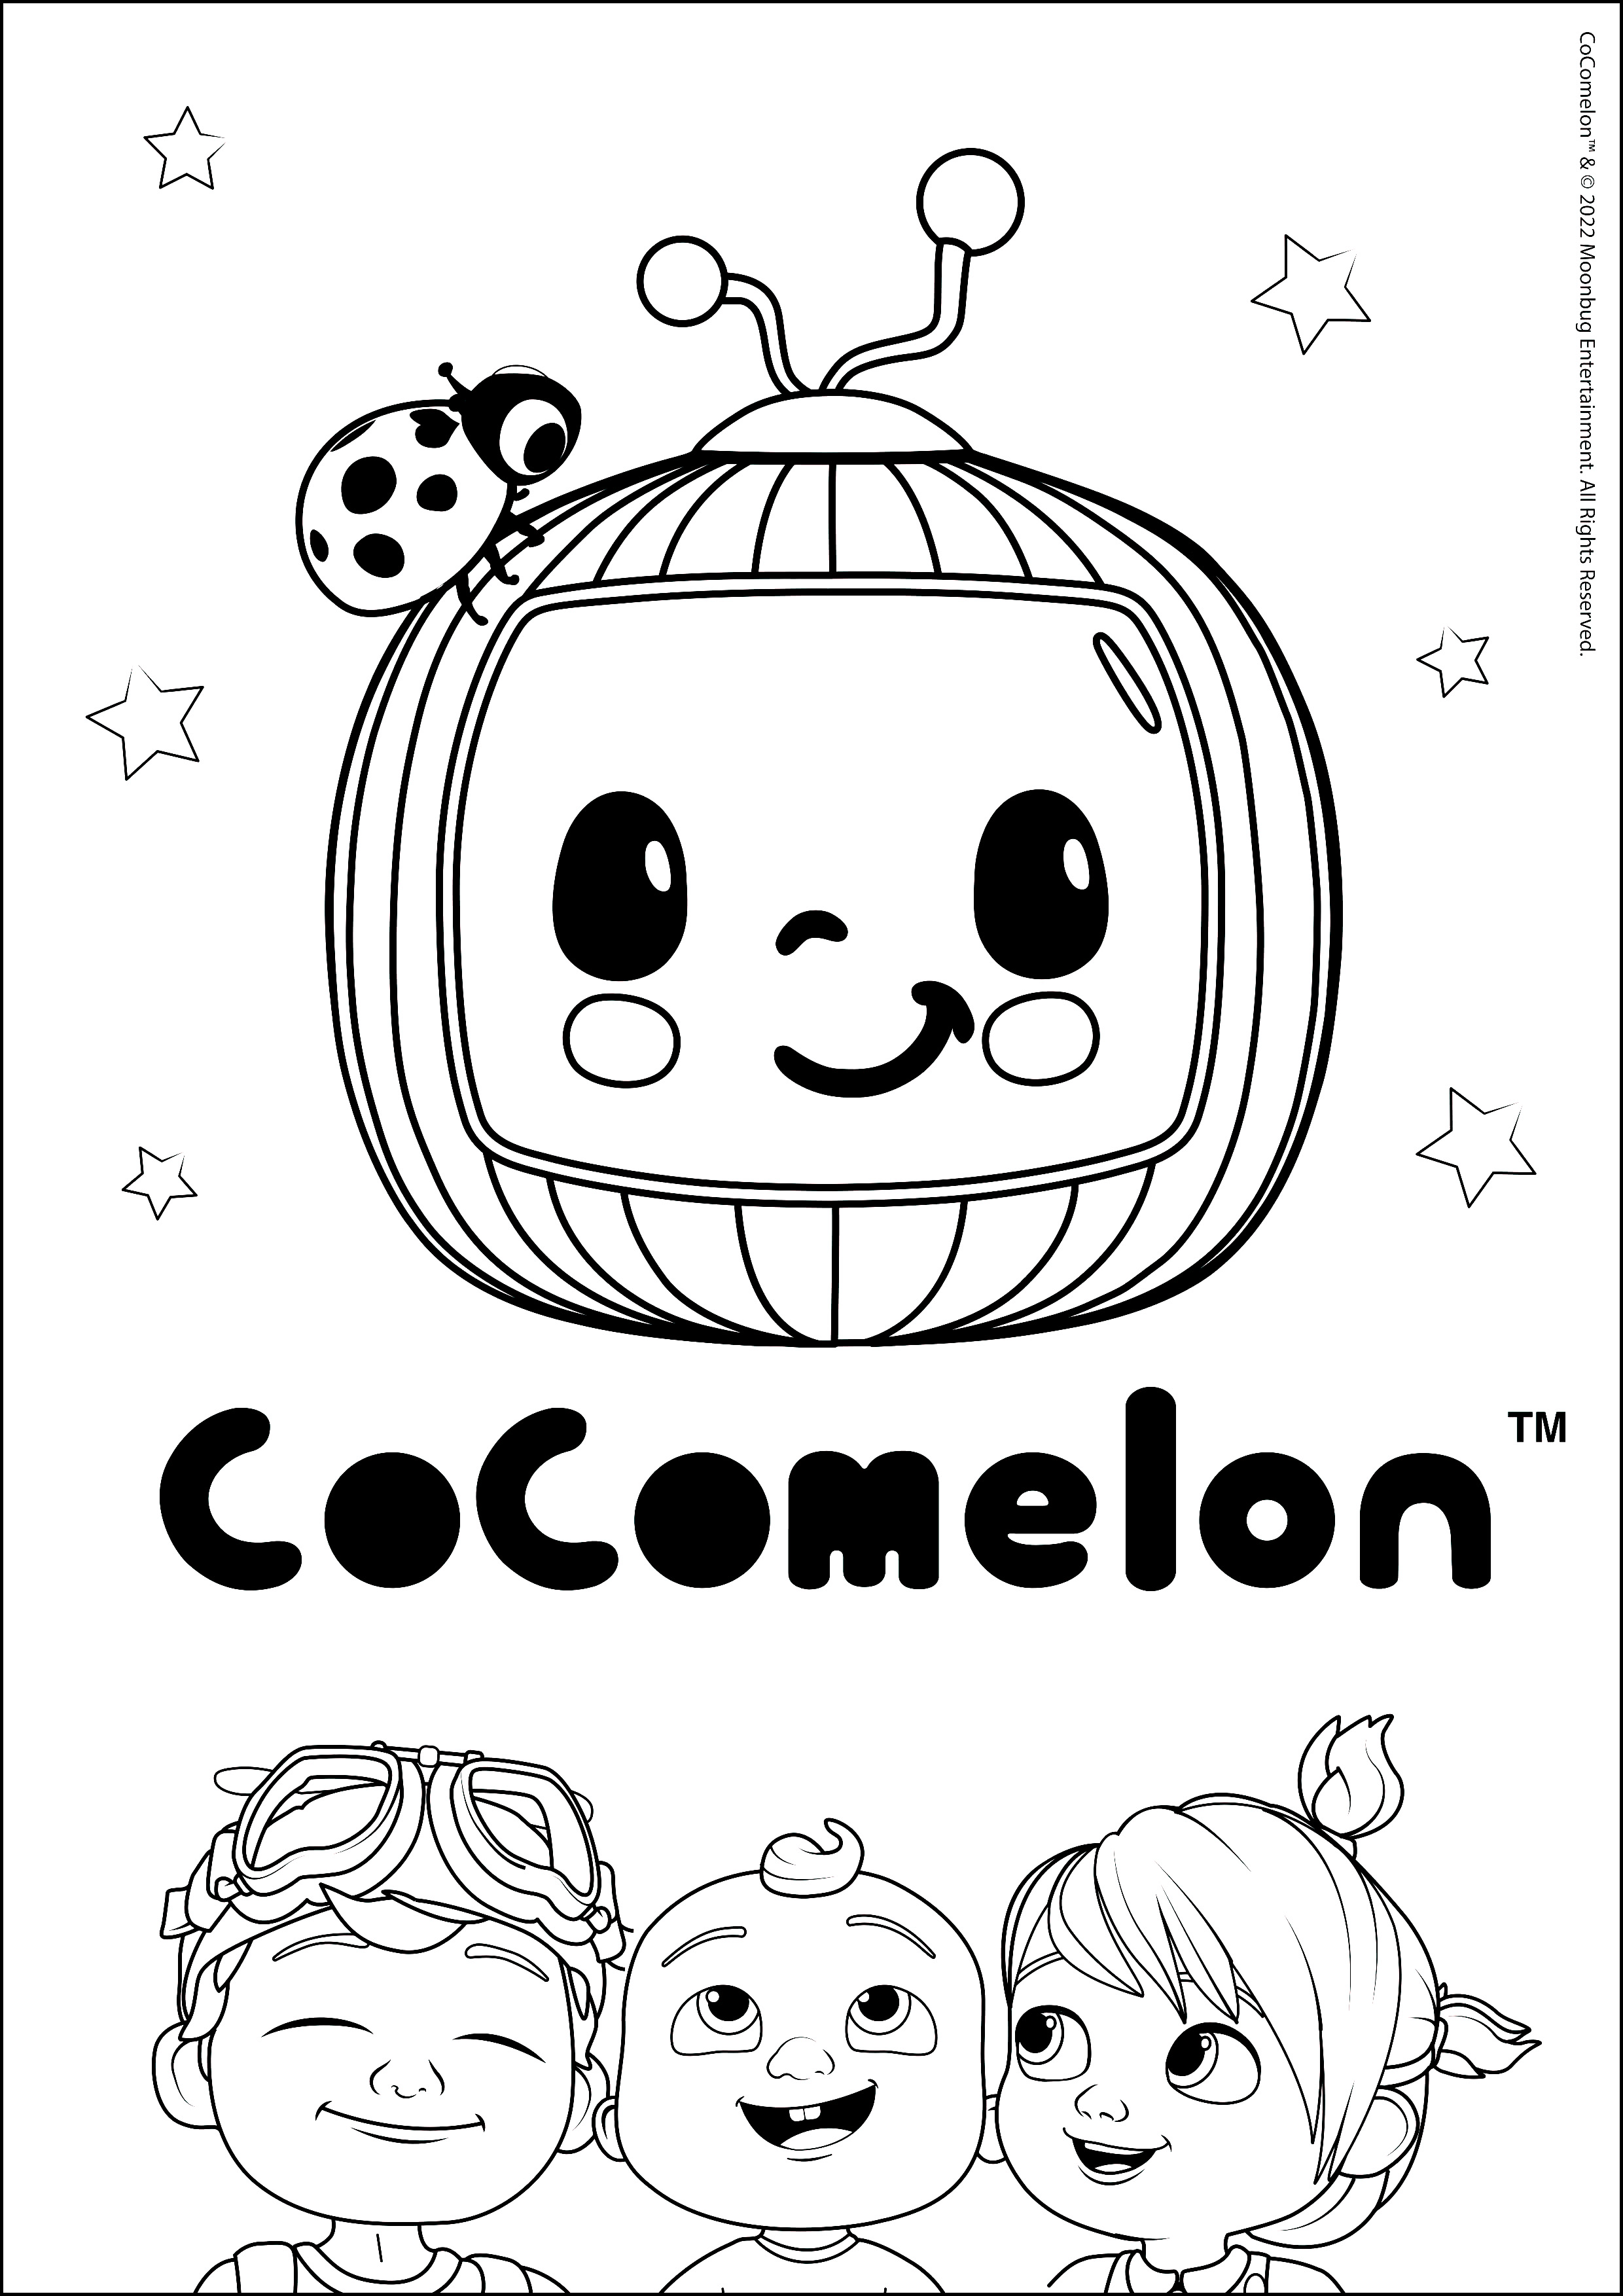 Cocomelon mascot and main characters - Cocomelon Kids Coloring Pages